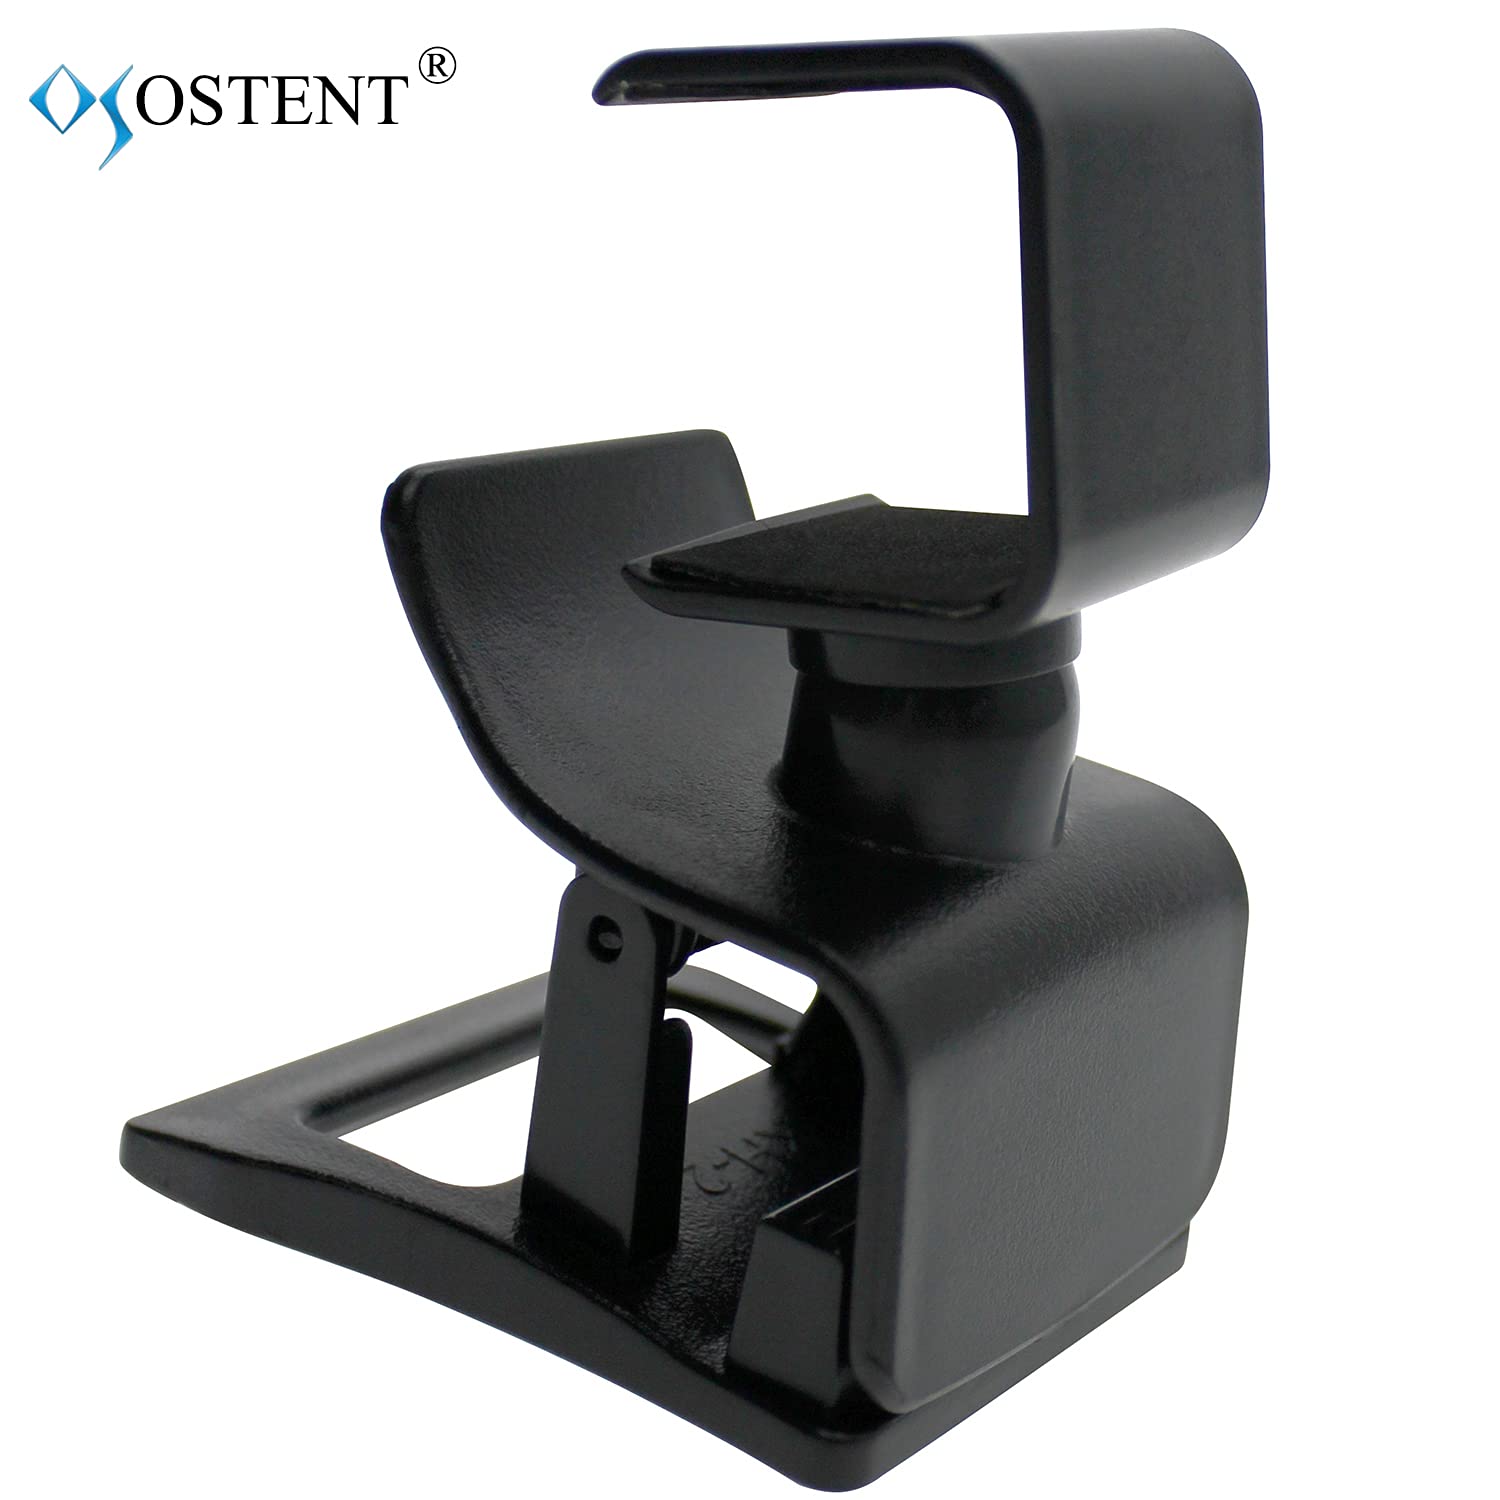 OSTENT TV Clip Mount Stand Holder for Sony PS4 Eye Camera Sensor [video game]